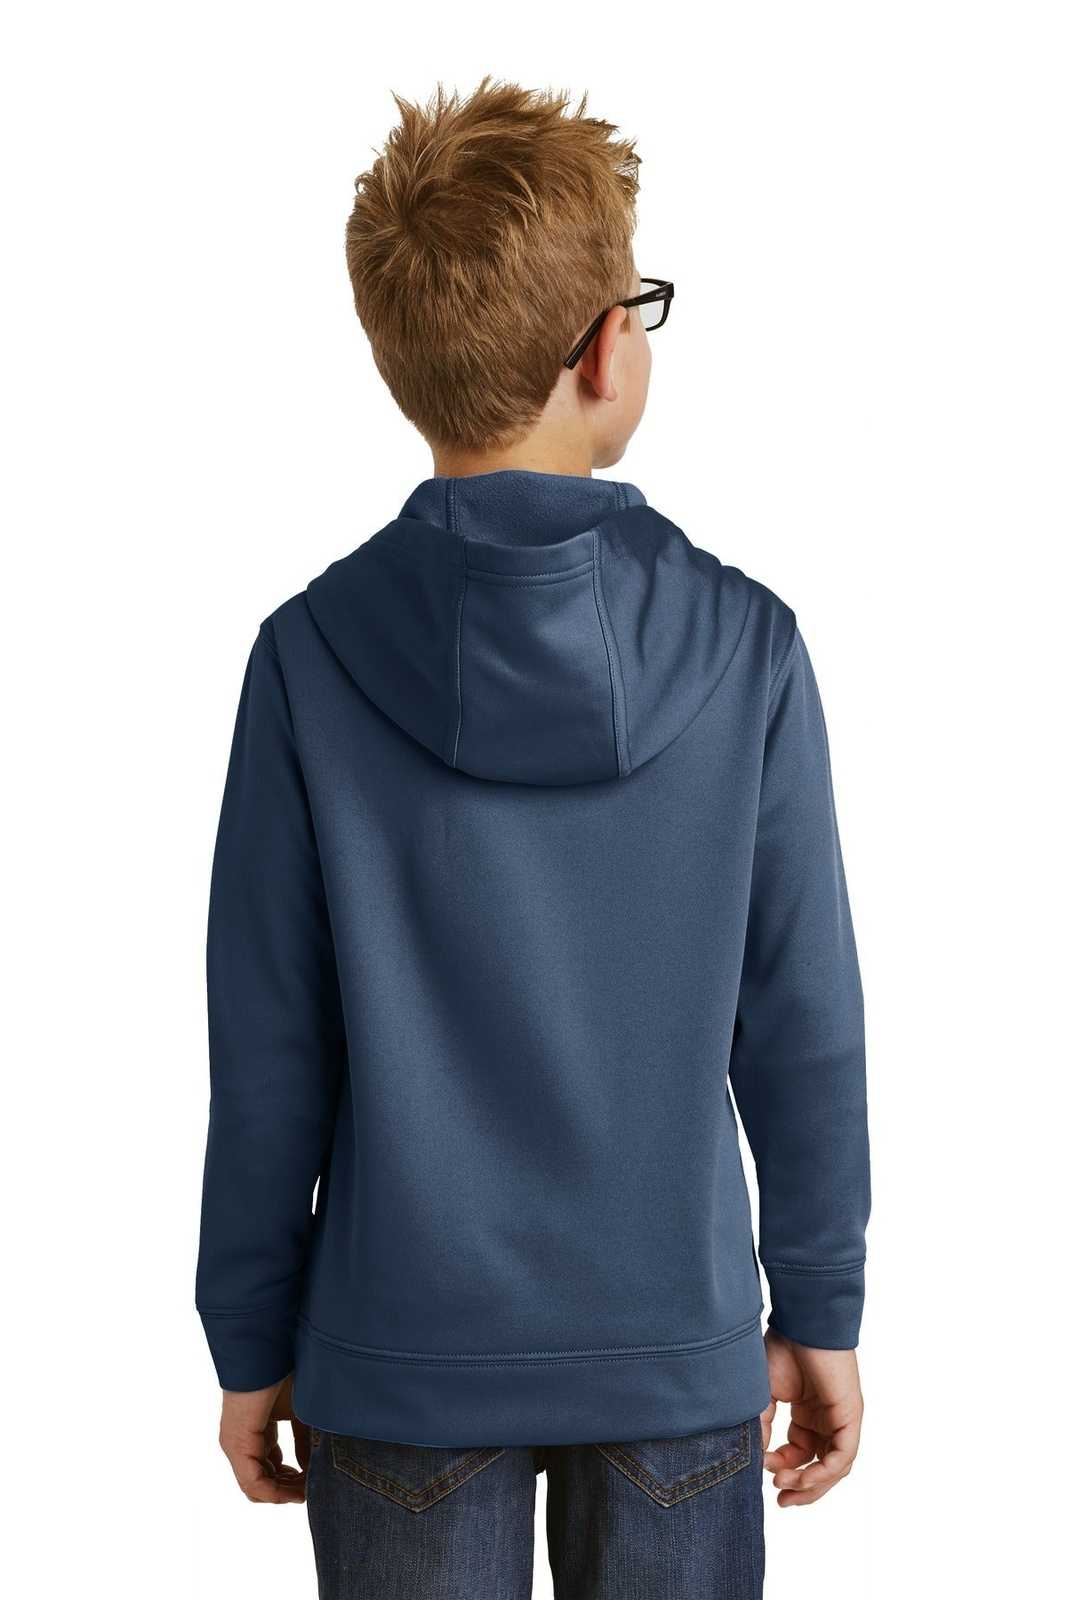 Port & Company PC590YH Youth Performance Fleece Pullover Hooded Sweatshirt - Deep Navy - HIT a Double - 1